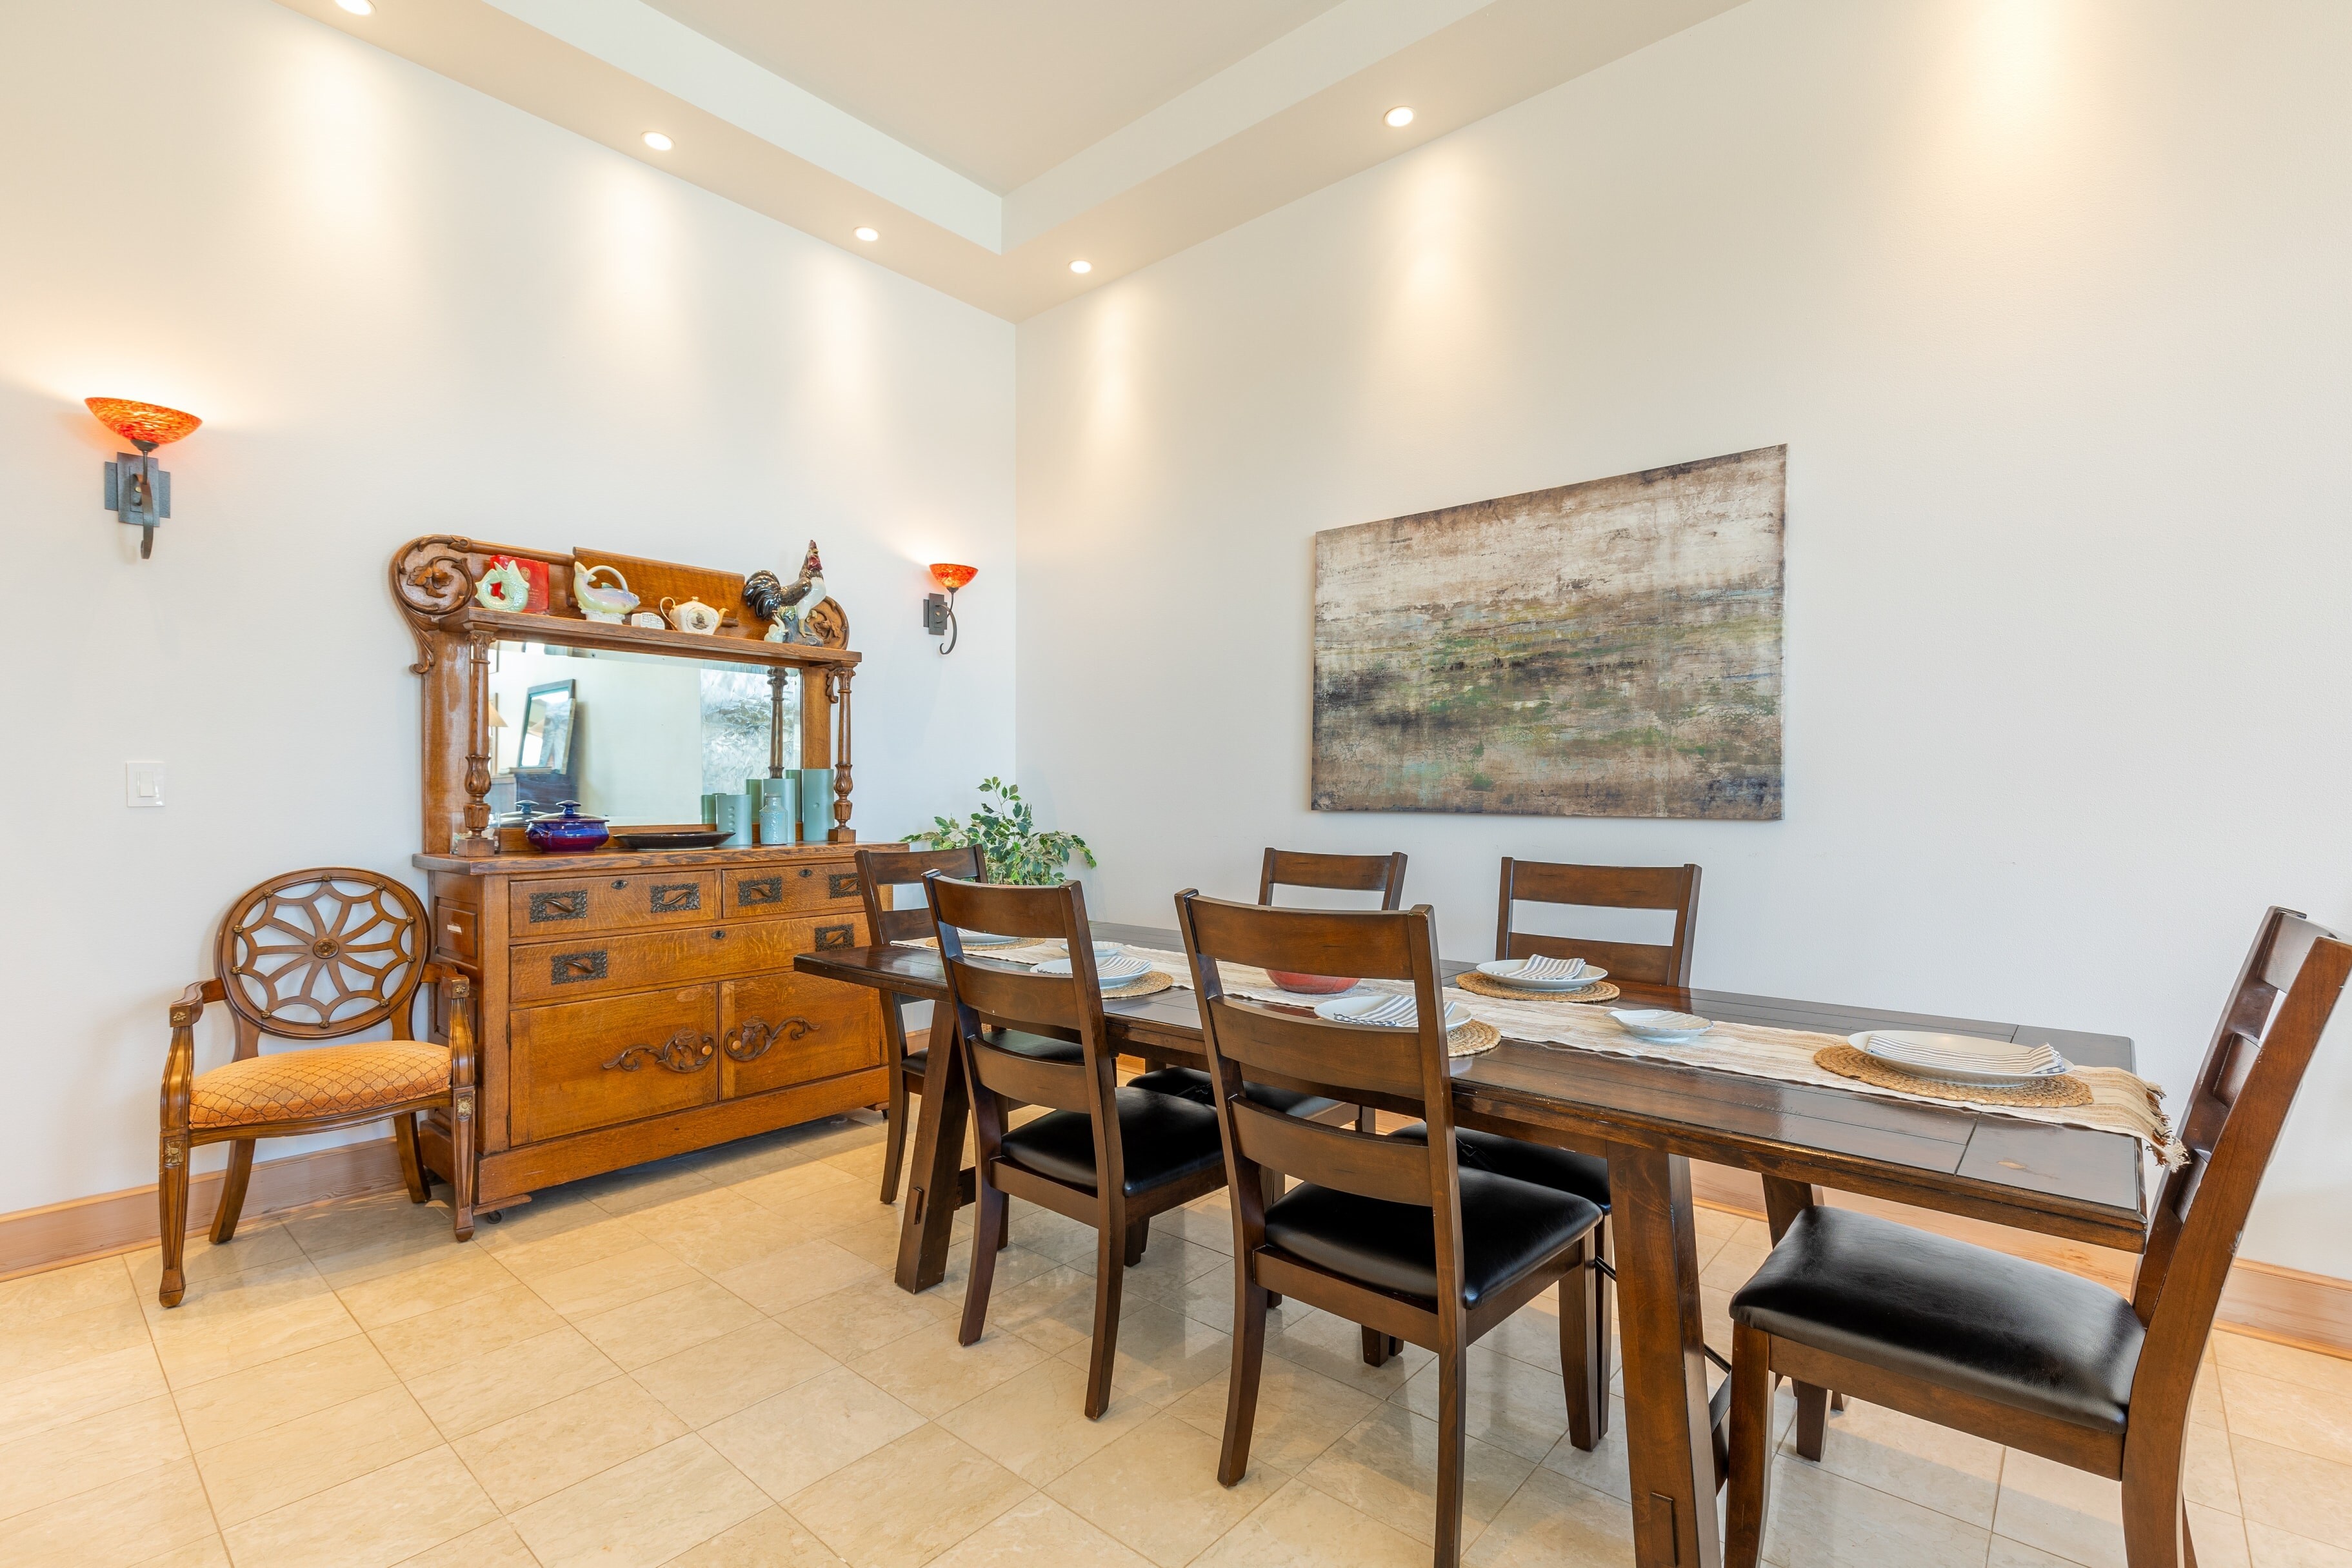 Gather and dine in style in this welcoming dining area.